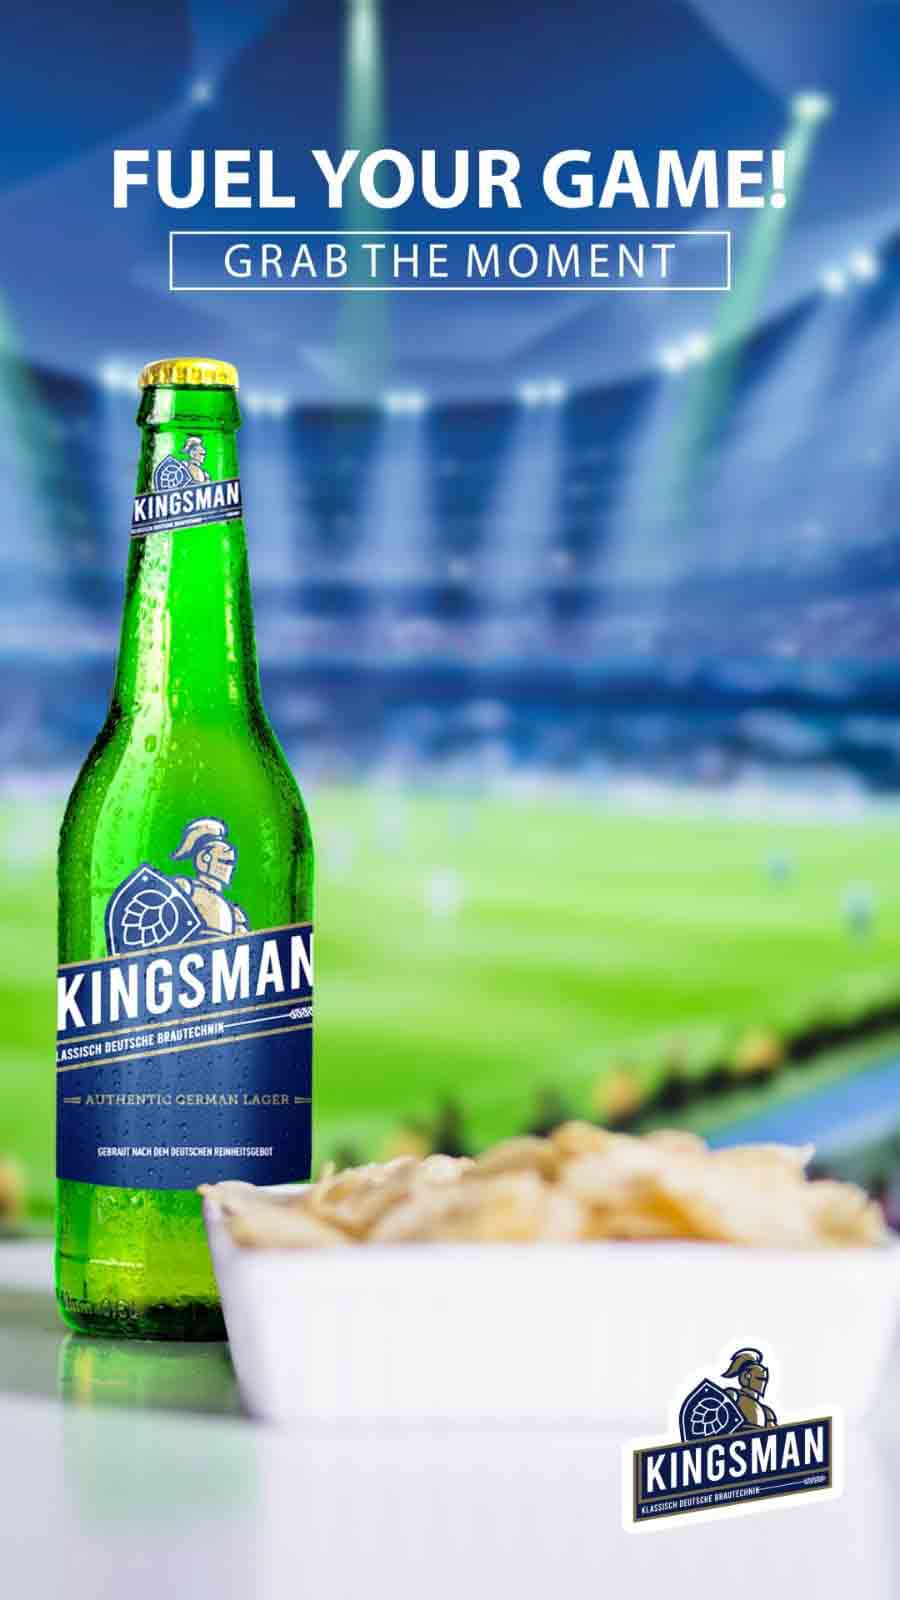 Fuel your game with Kingsman beer